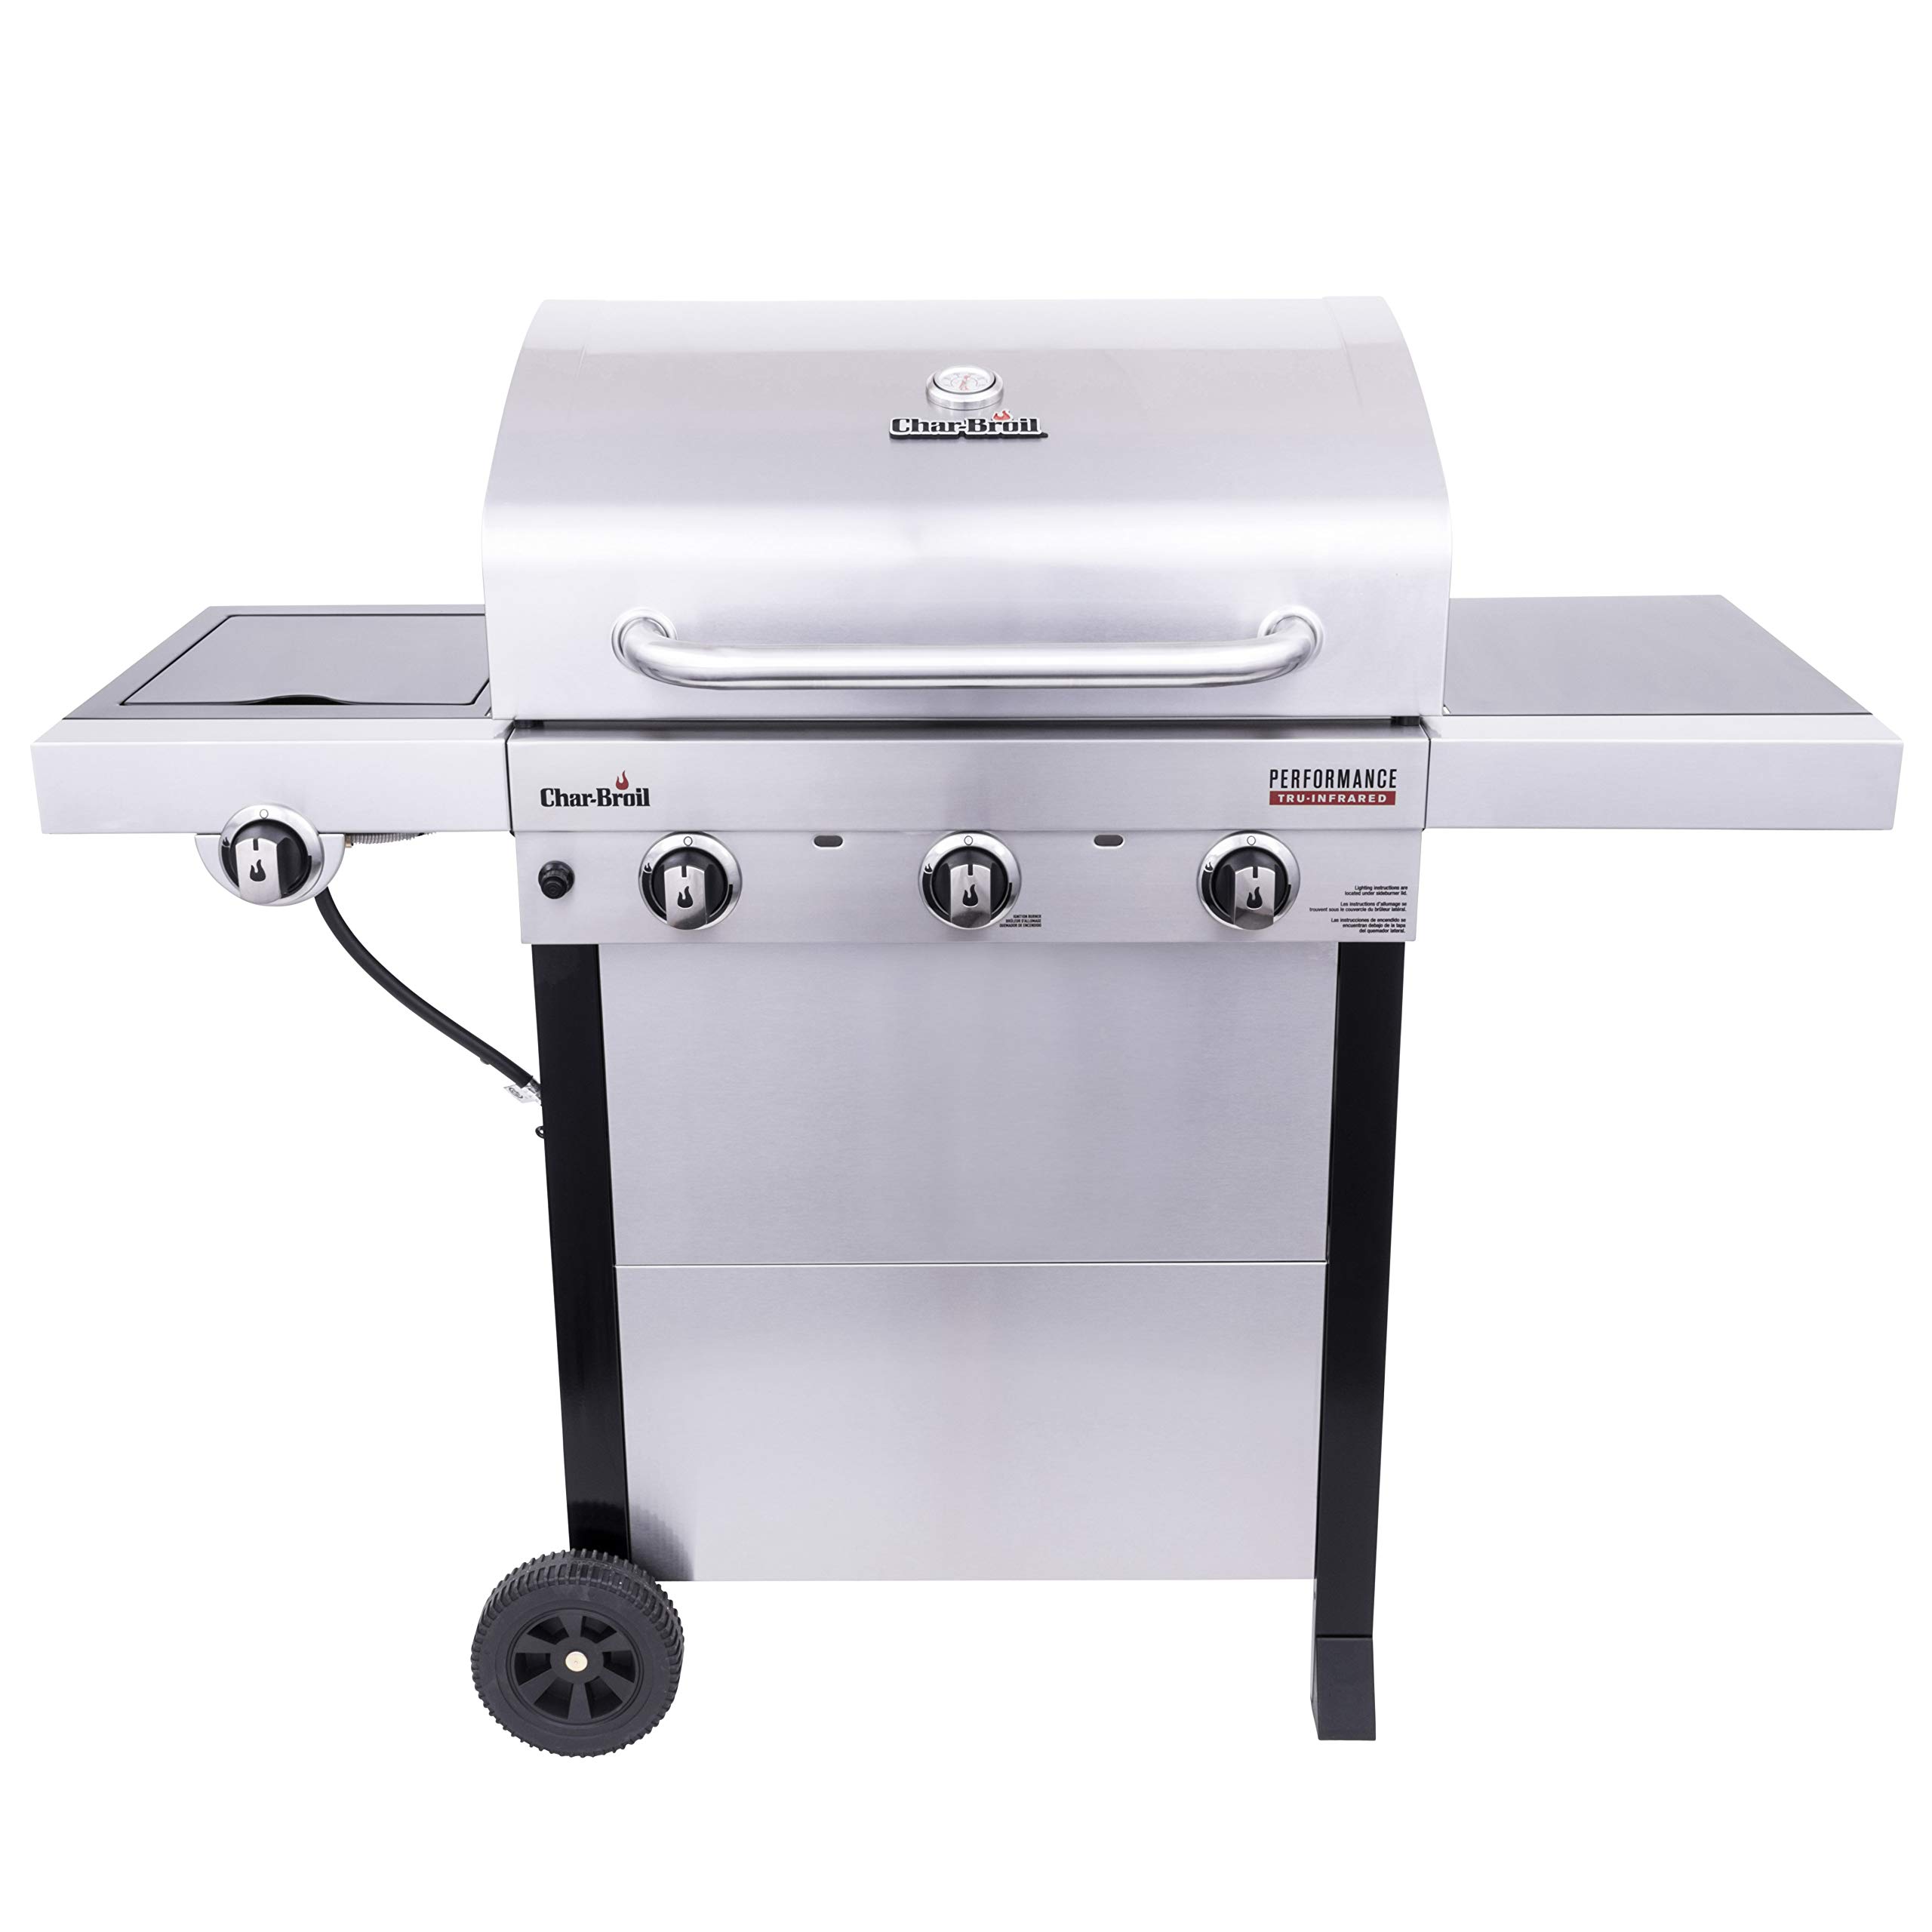 Char-Broil® Performance Series™ TRU-Infrared Cooking Technology 3-Burner with Side Burner Cart Propane Gas Stainless Steel Grill